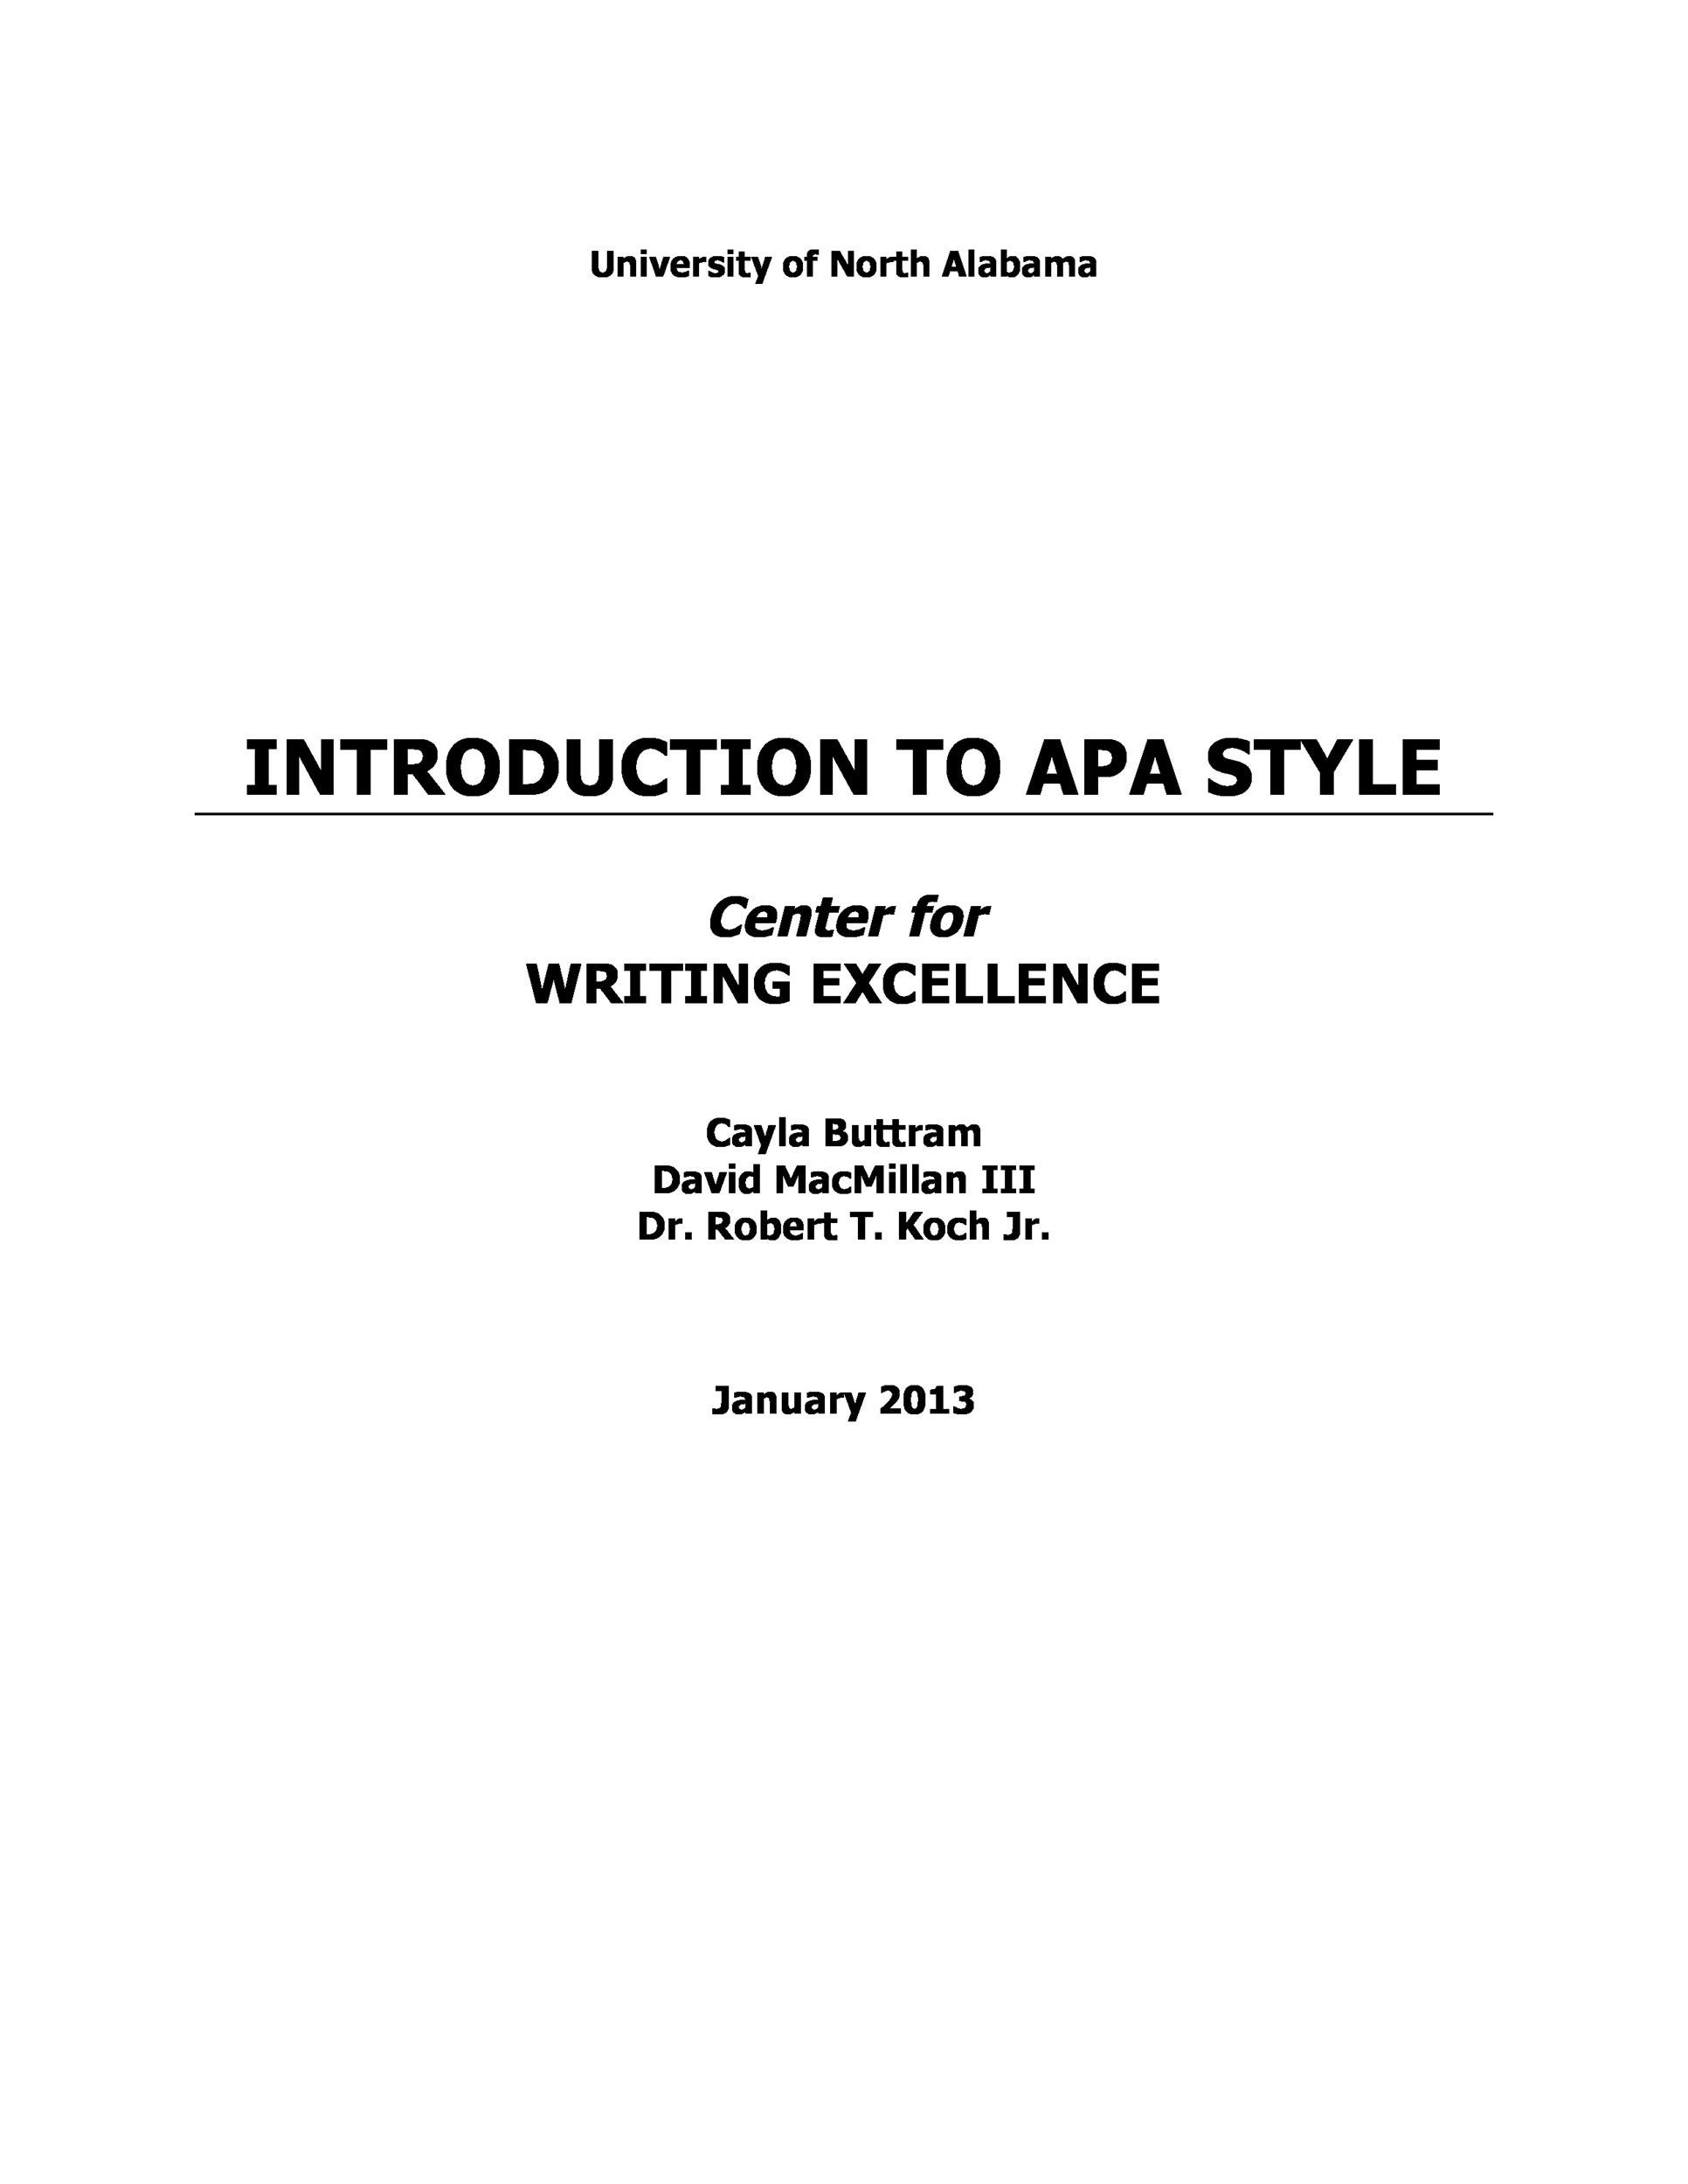 how to do an apa style paper